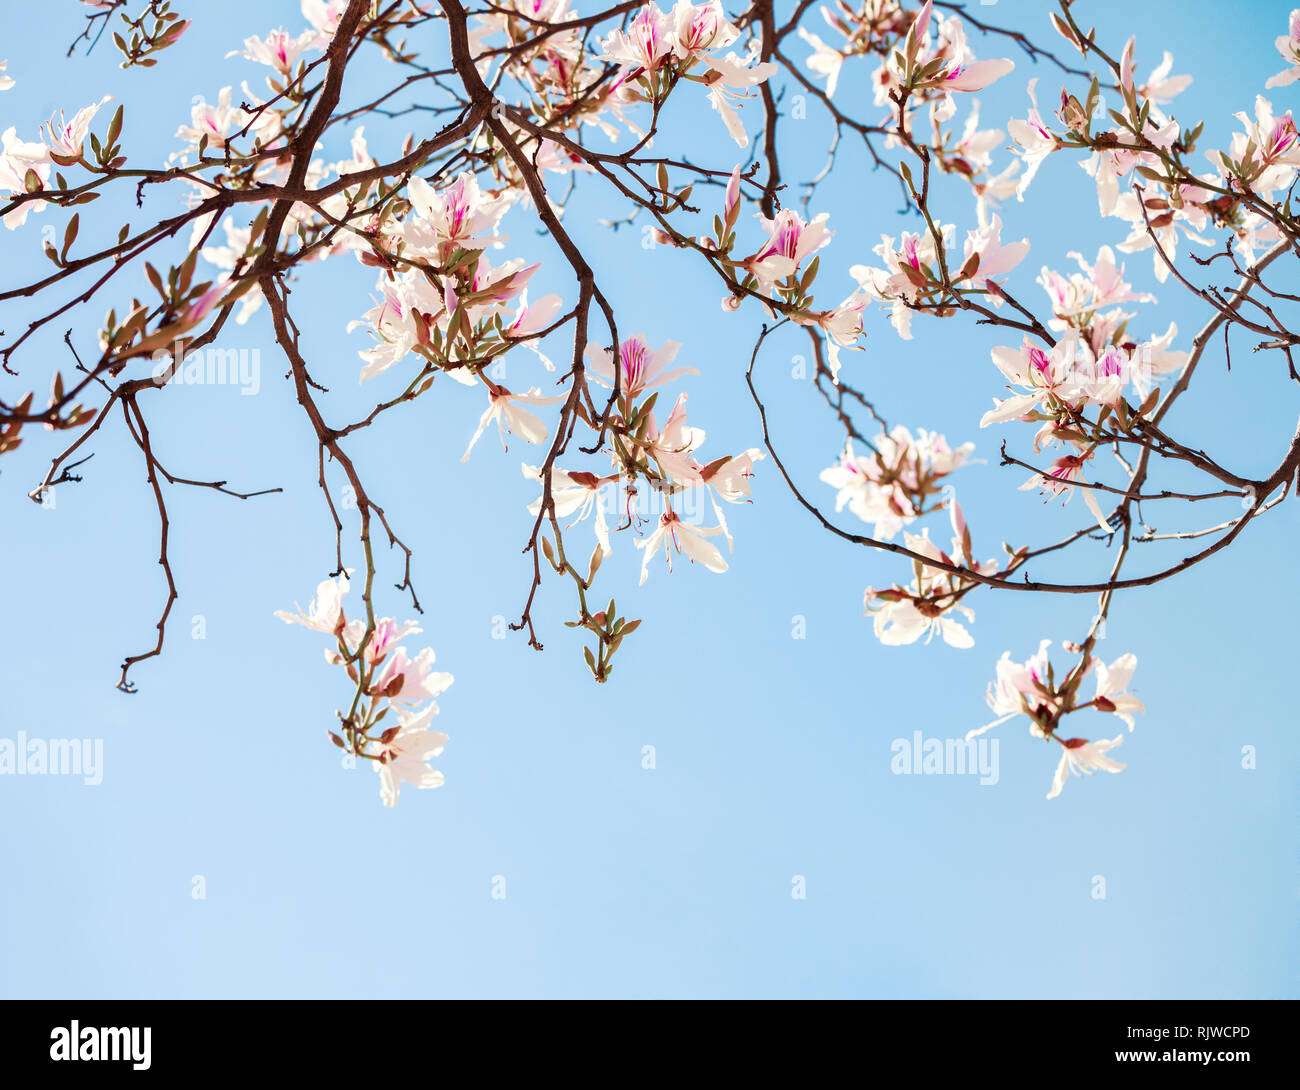 Beautiful light pink  flowers (Orchid Tree) on blue sky background. Stock Photo